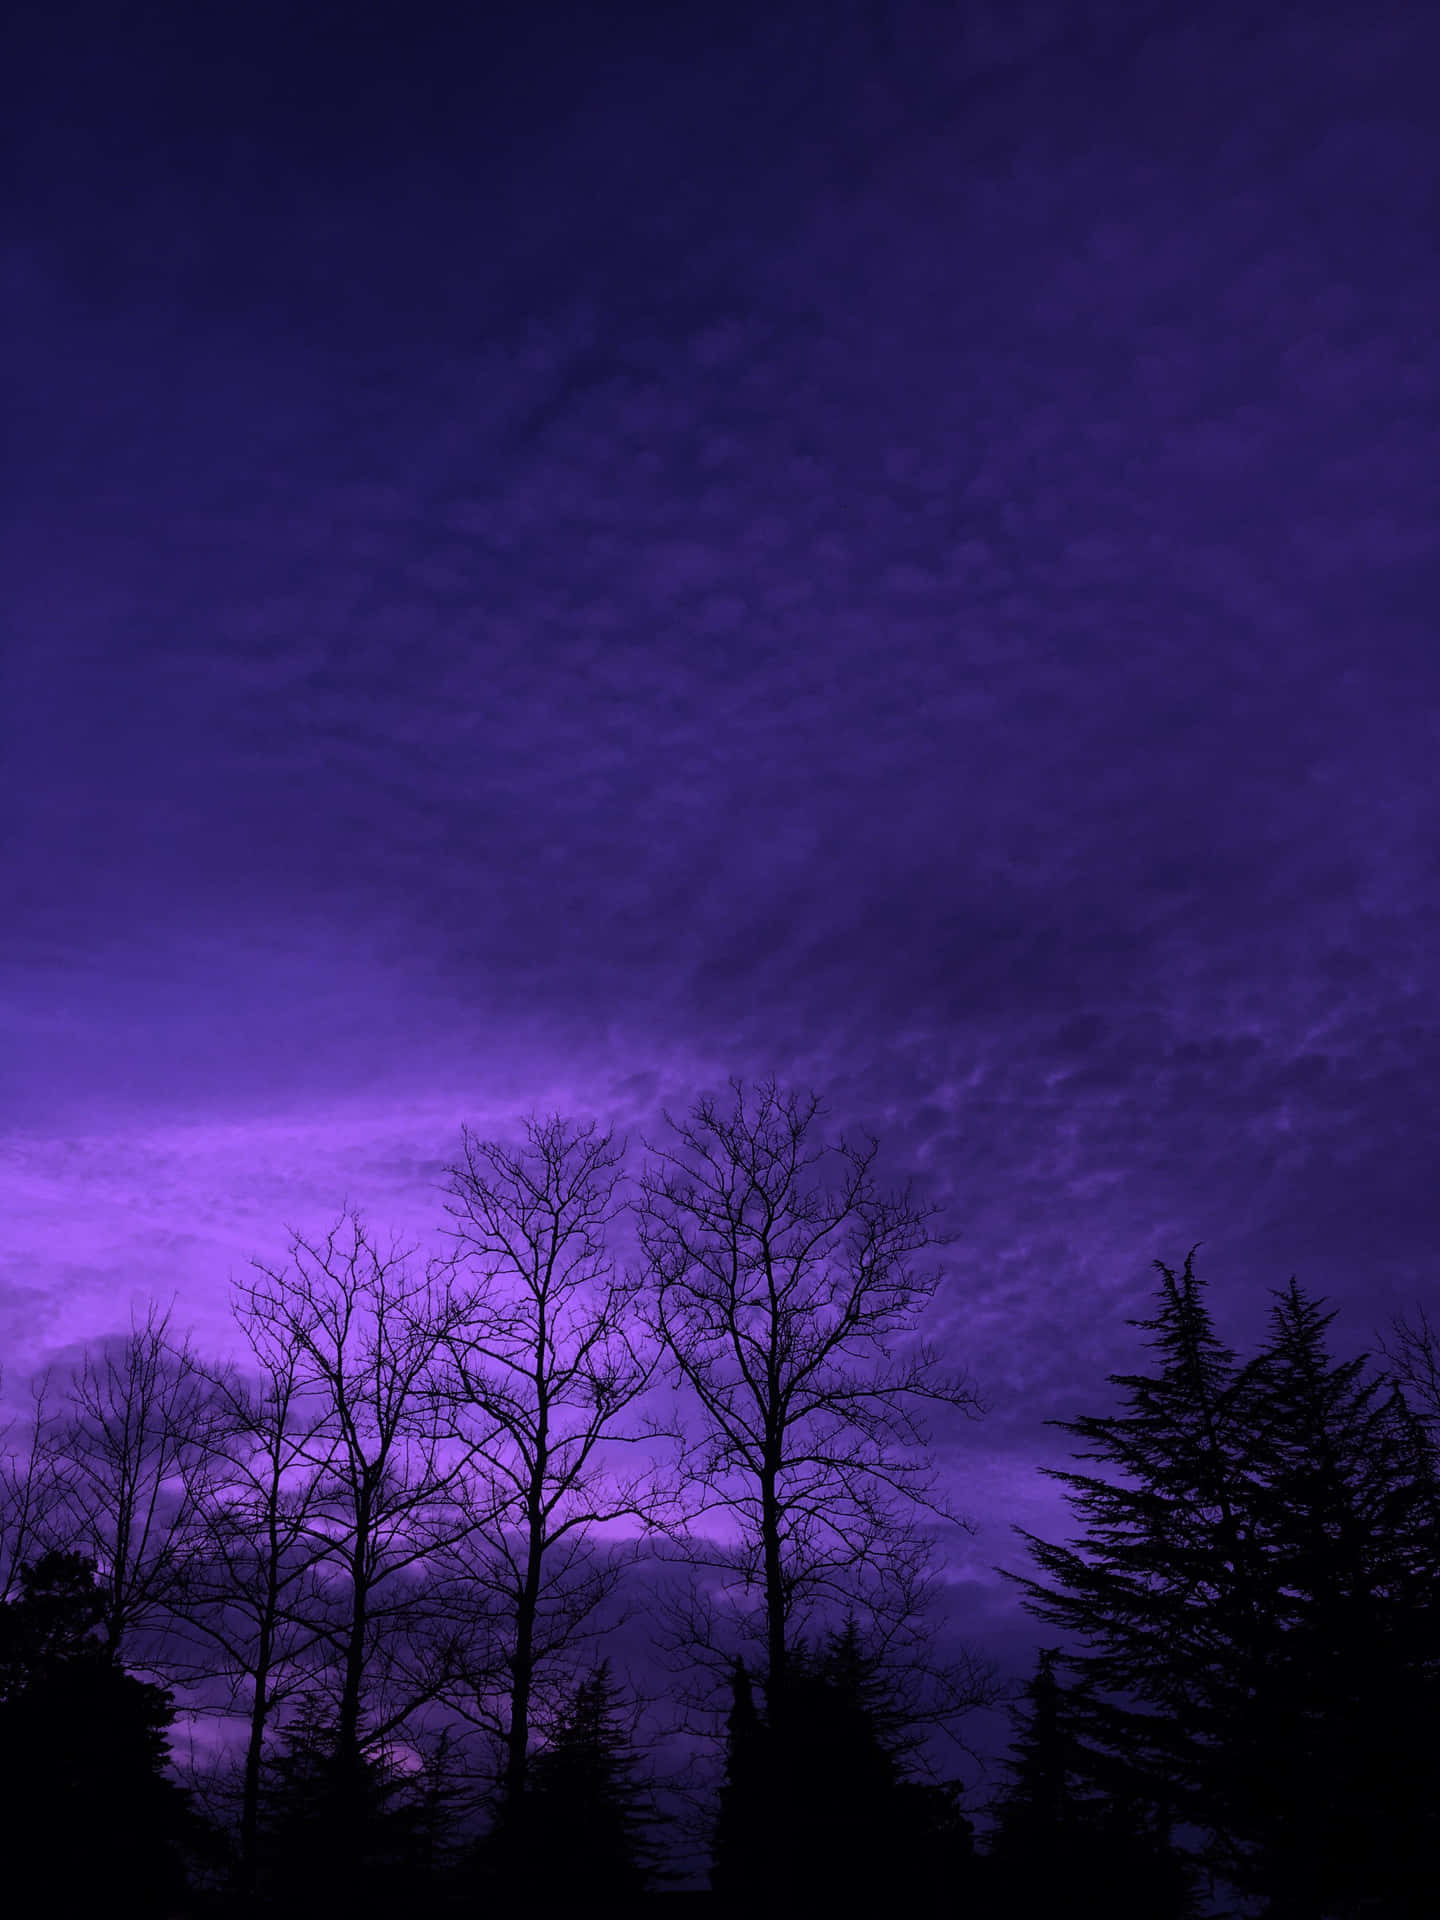 Aesthetic Nature With A Purple Sky